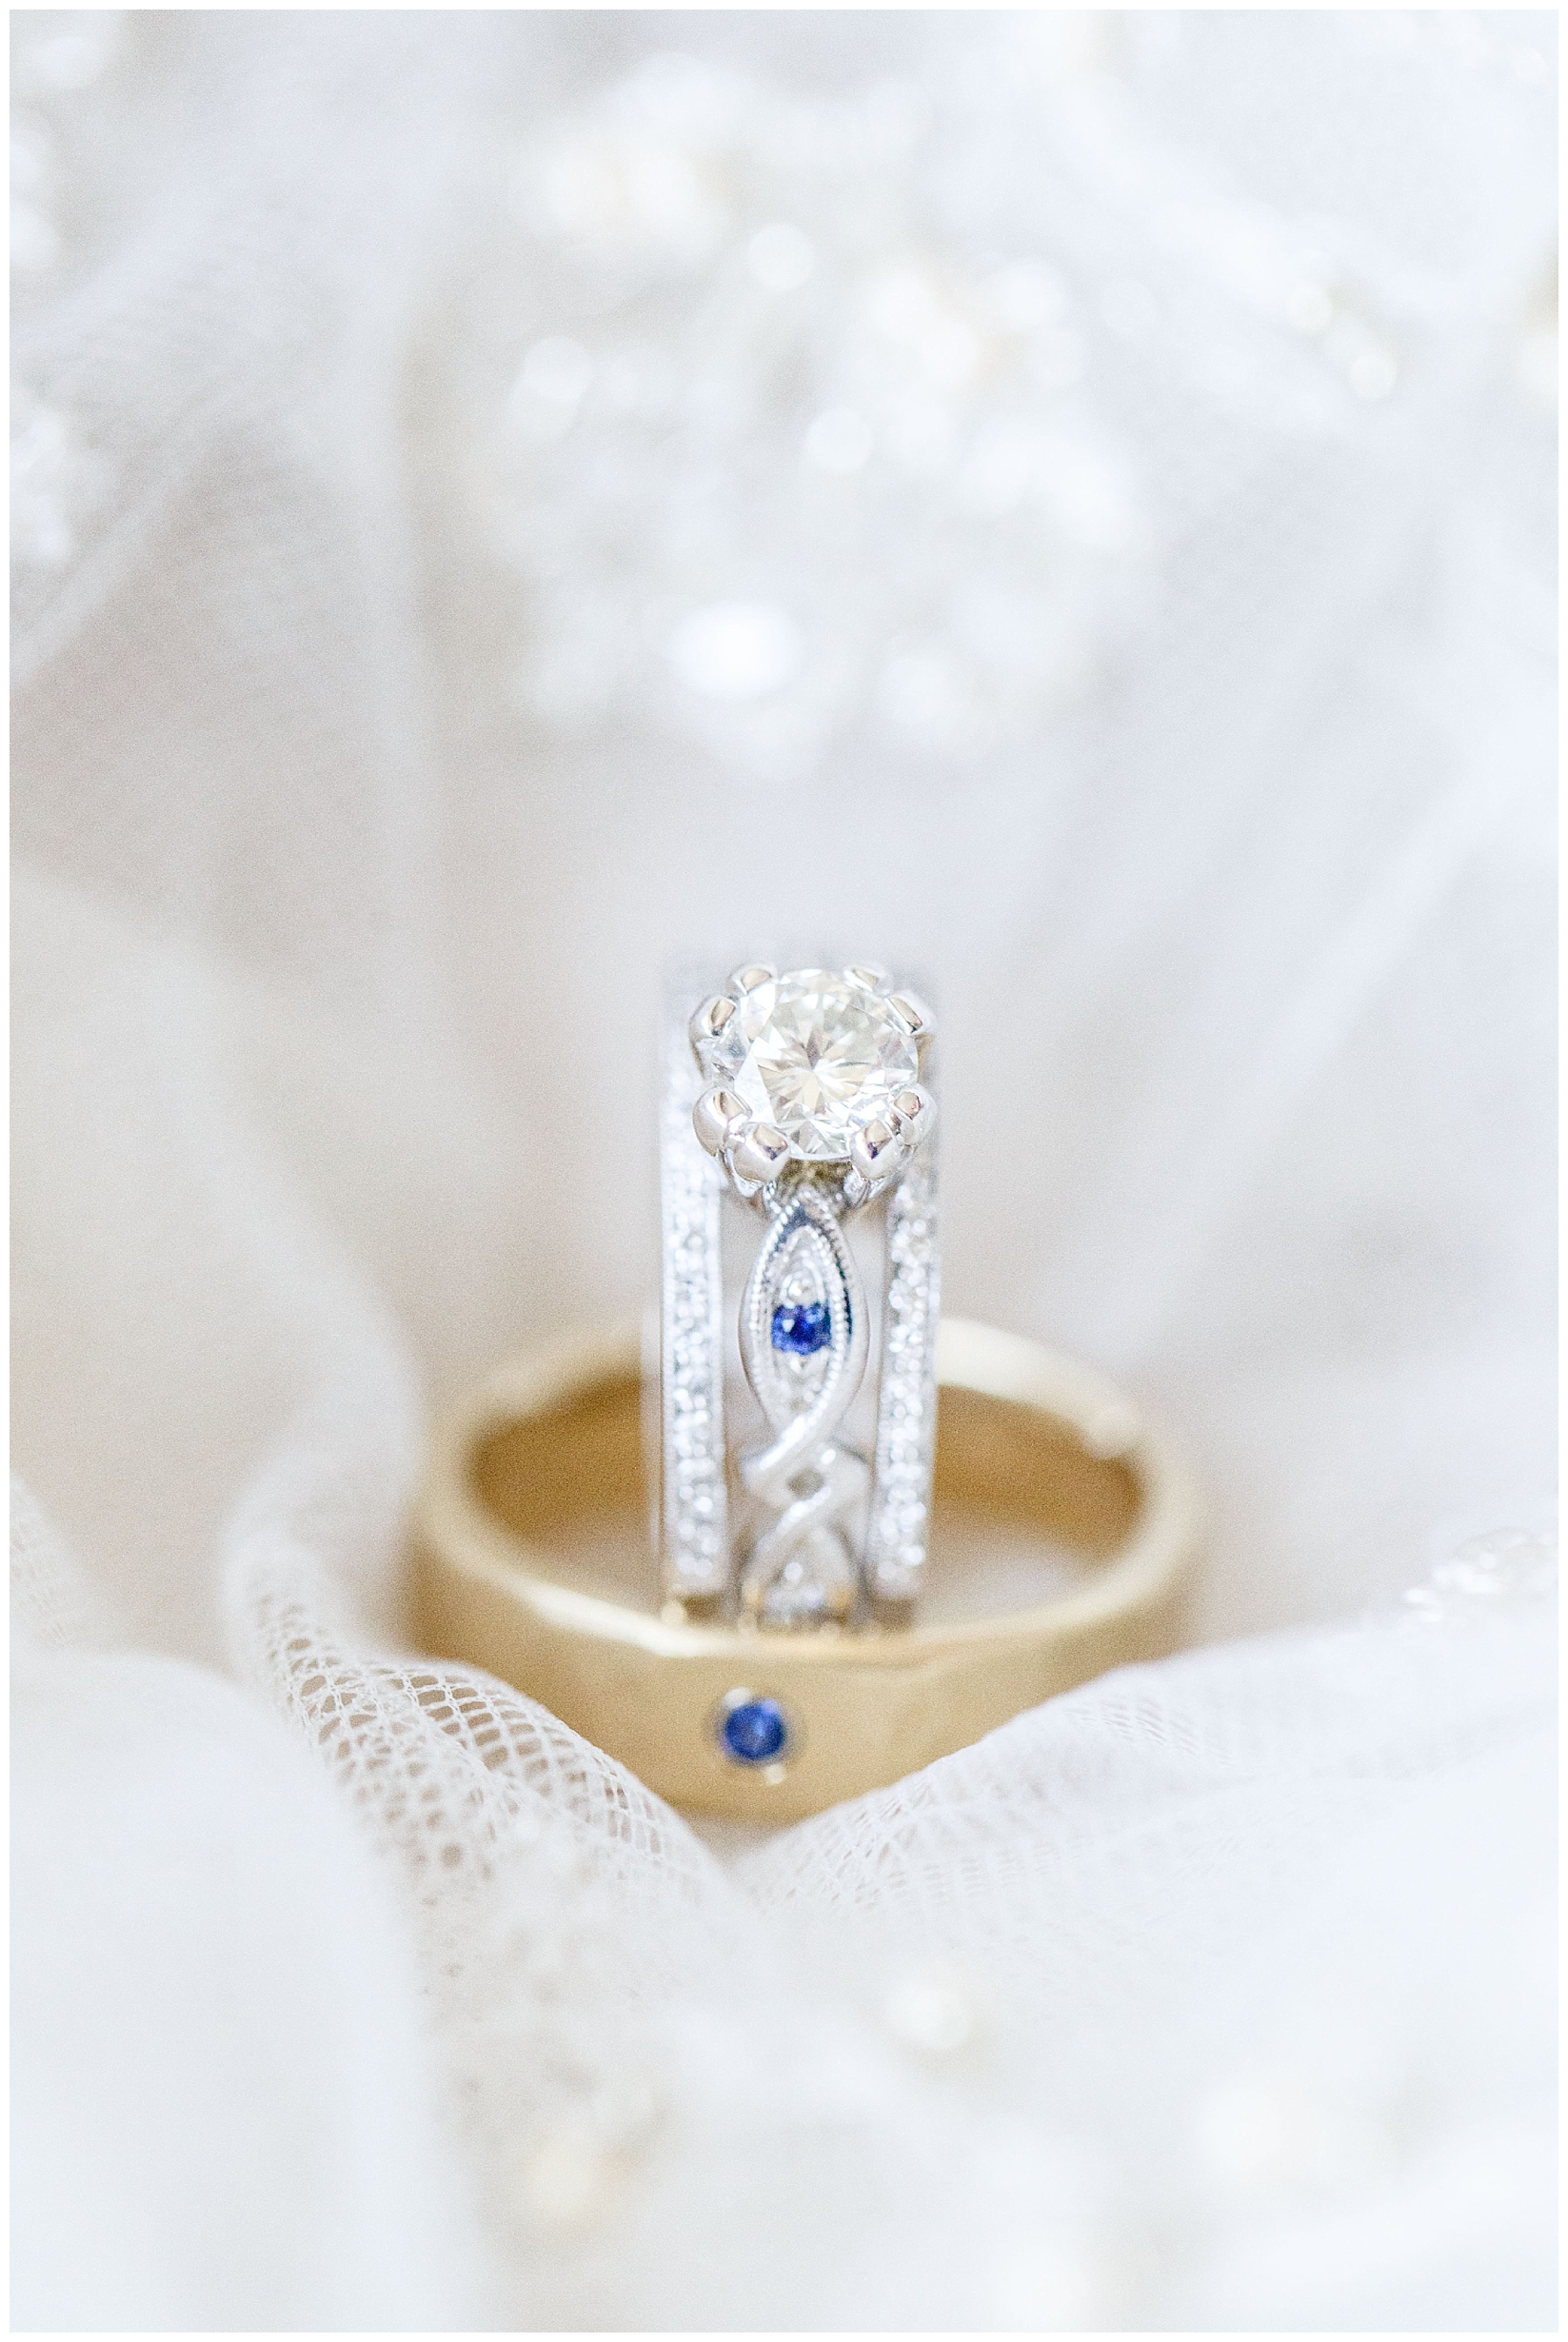 custom ring with blue stones and gold wedding band